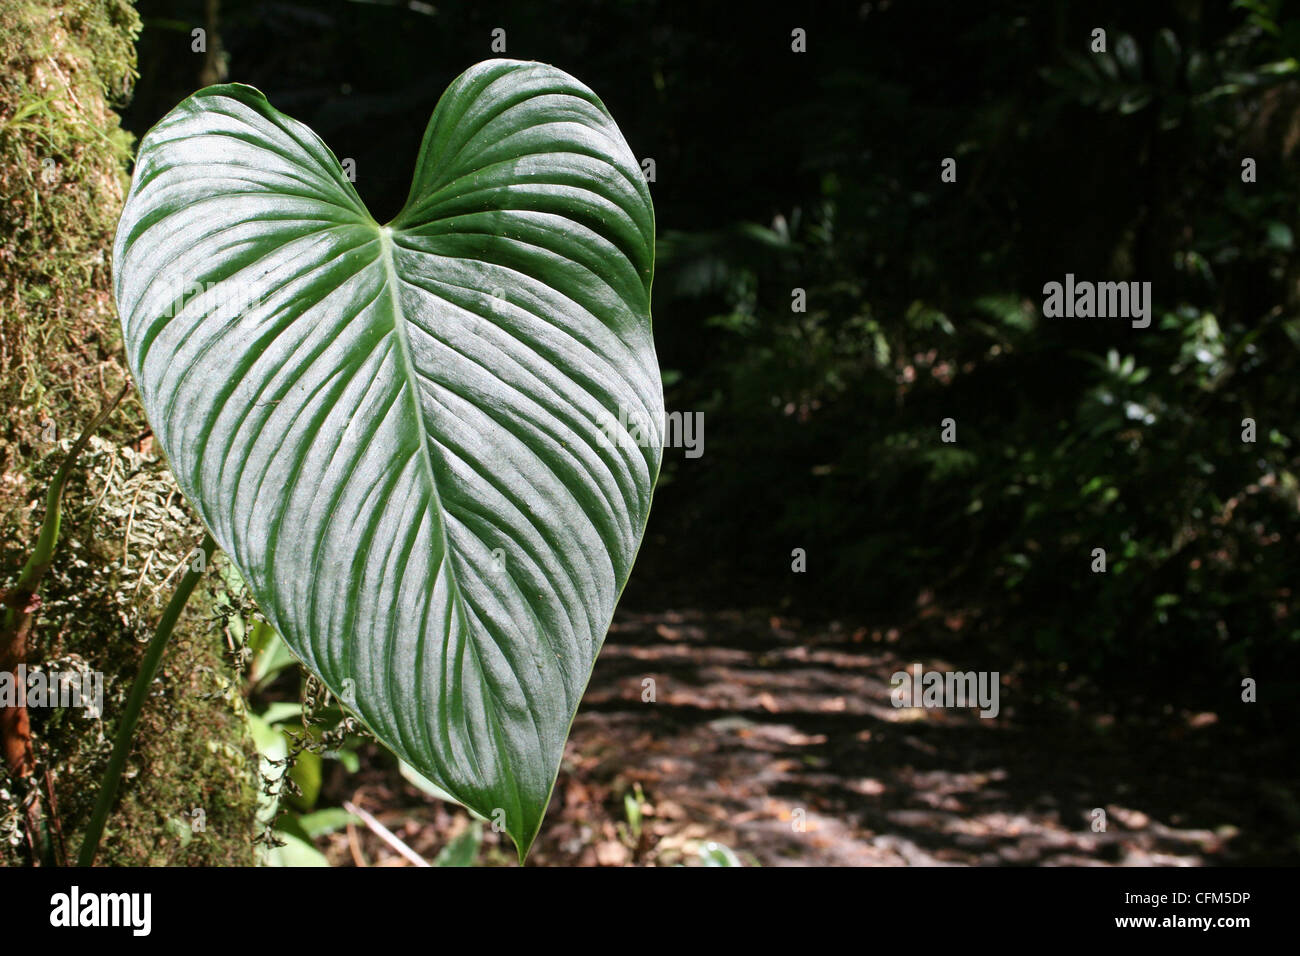 Heart-shaped Anthurium Leaf At The Edge Of A Forest Trail, Costa Rica Stock Photo